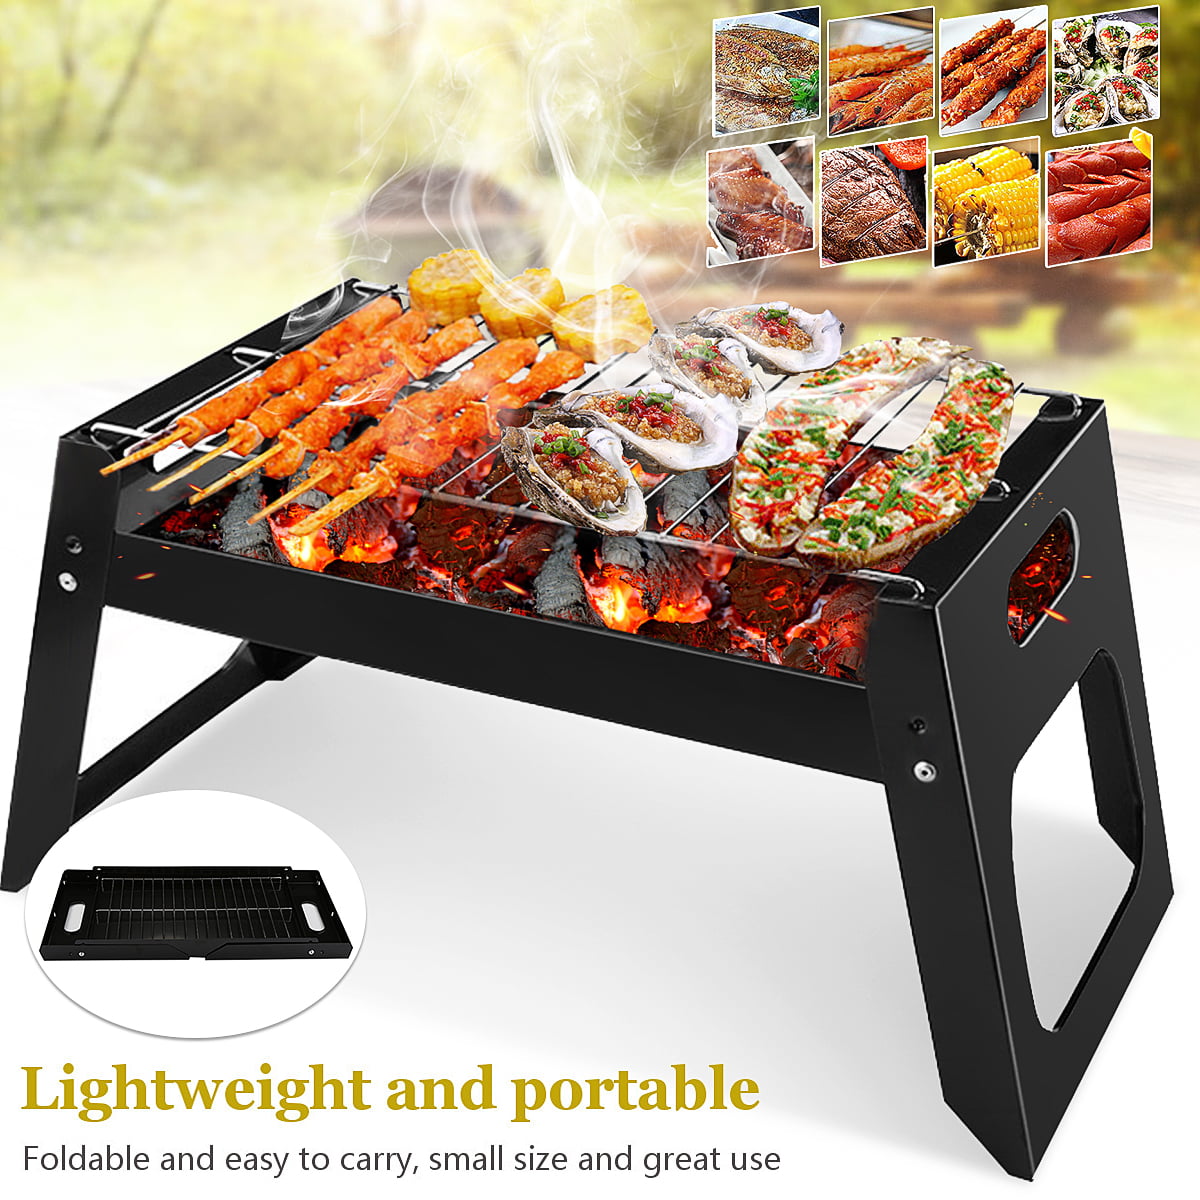 Portable BBQ Charcoal Grill, Barbecue Camping Picnic Grill Stove 